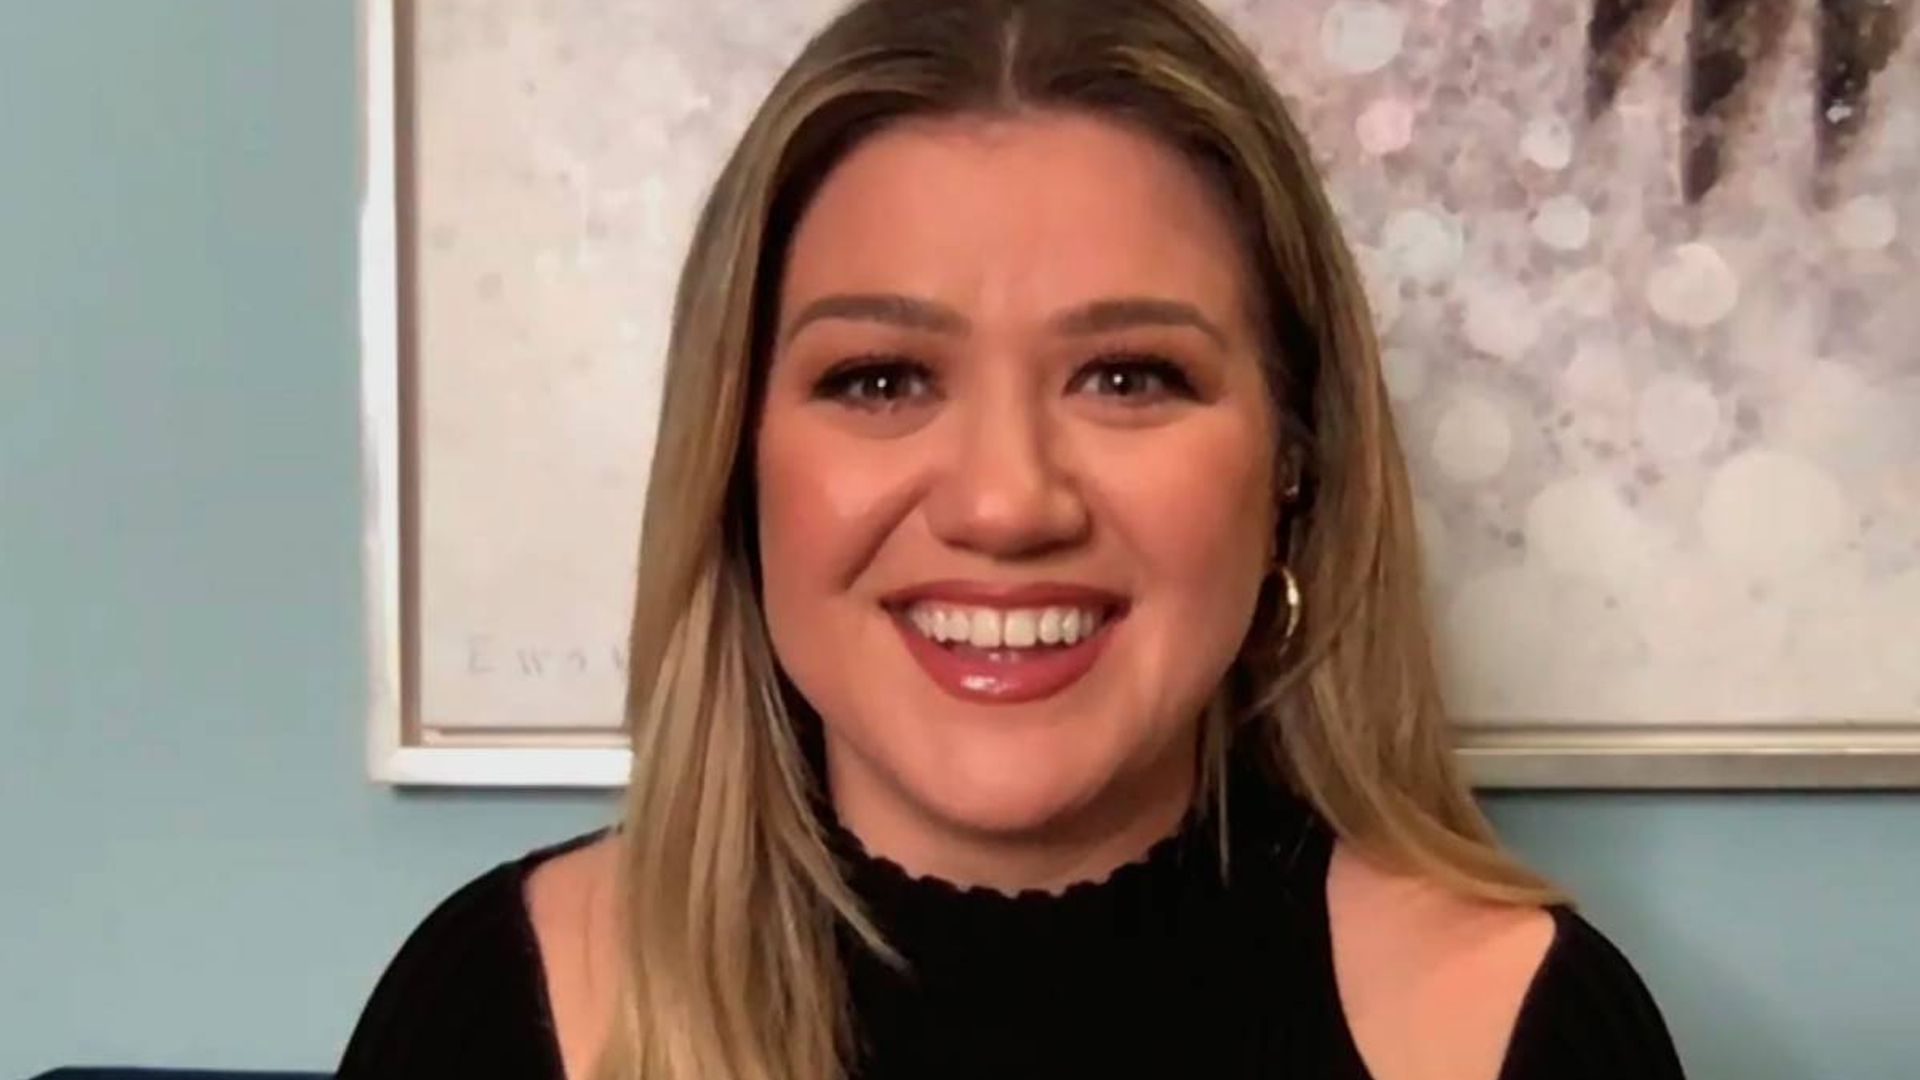 kelly clarkson engagement post sparks reaction